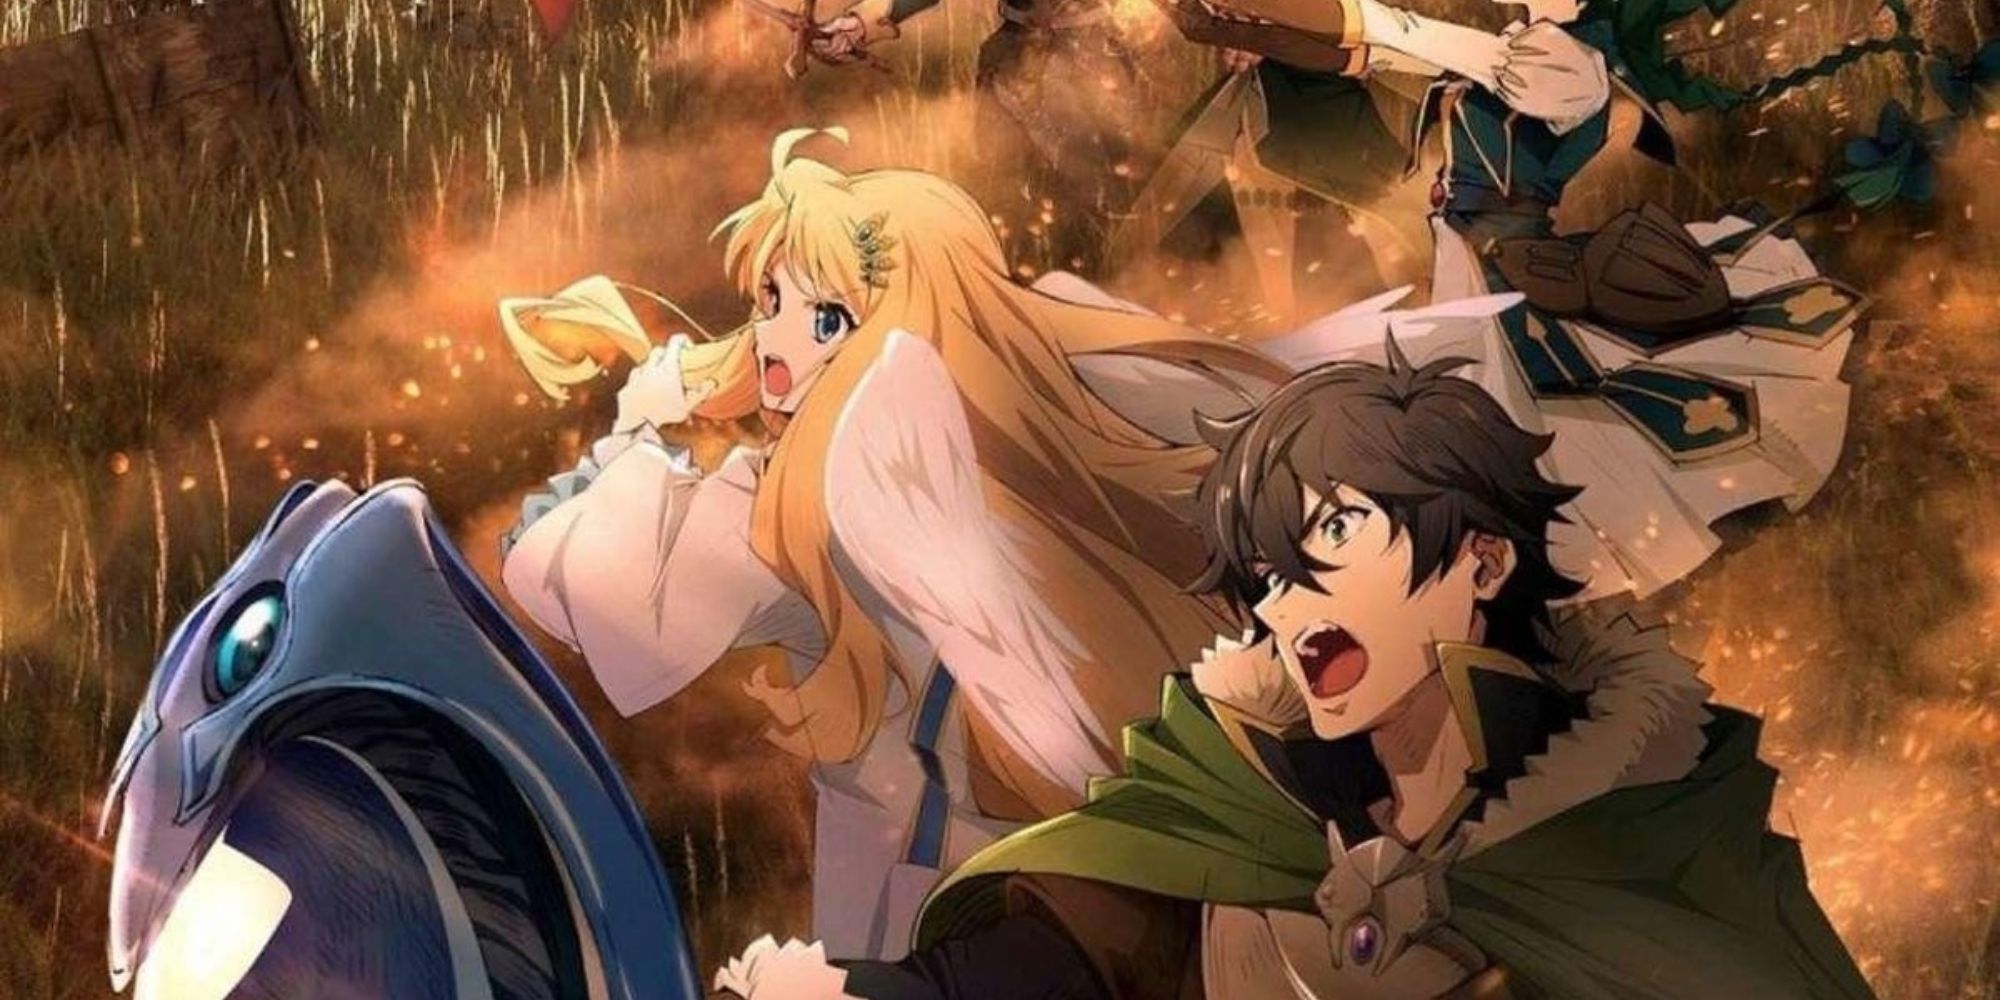 The Rising of the Shield Hero anime like Overlord